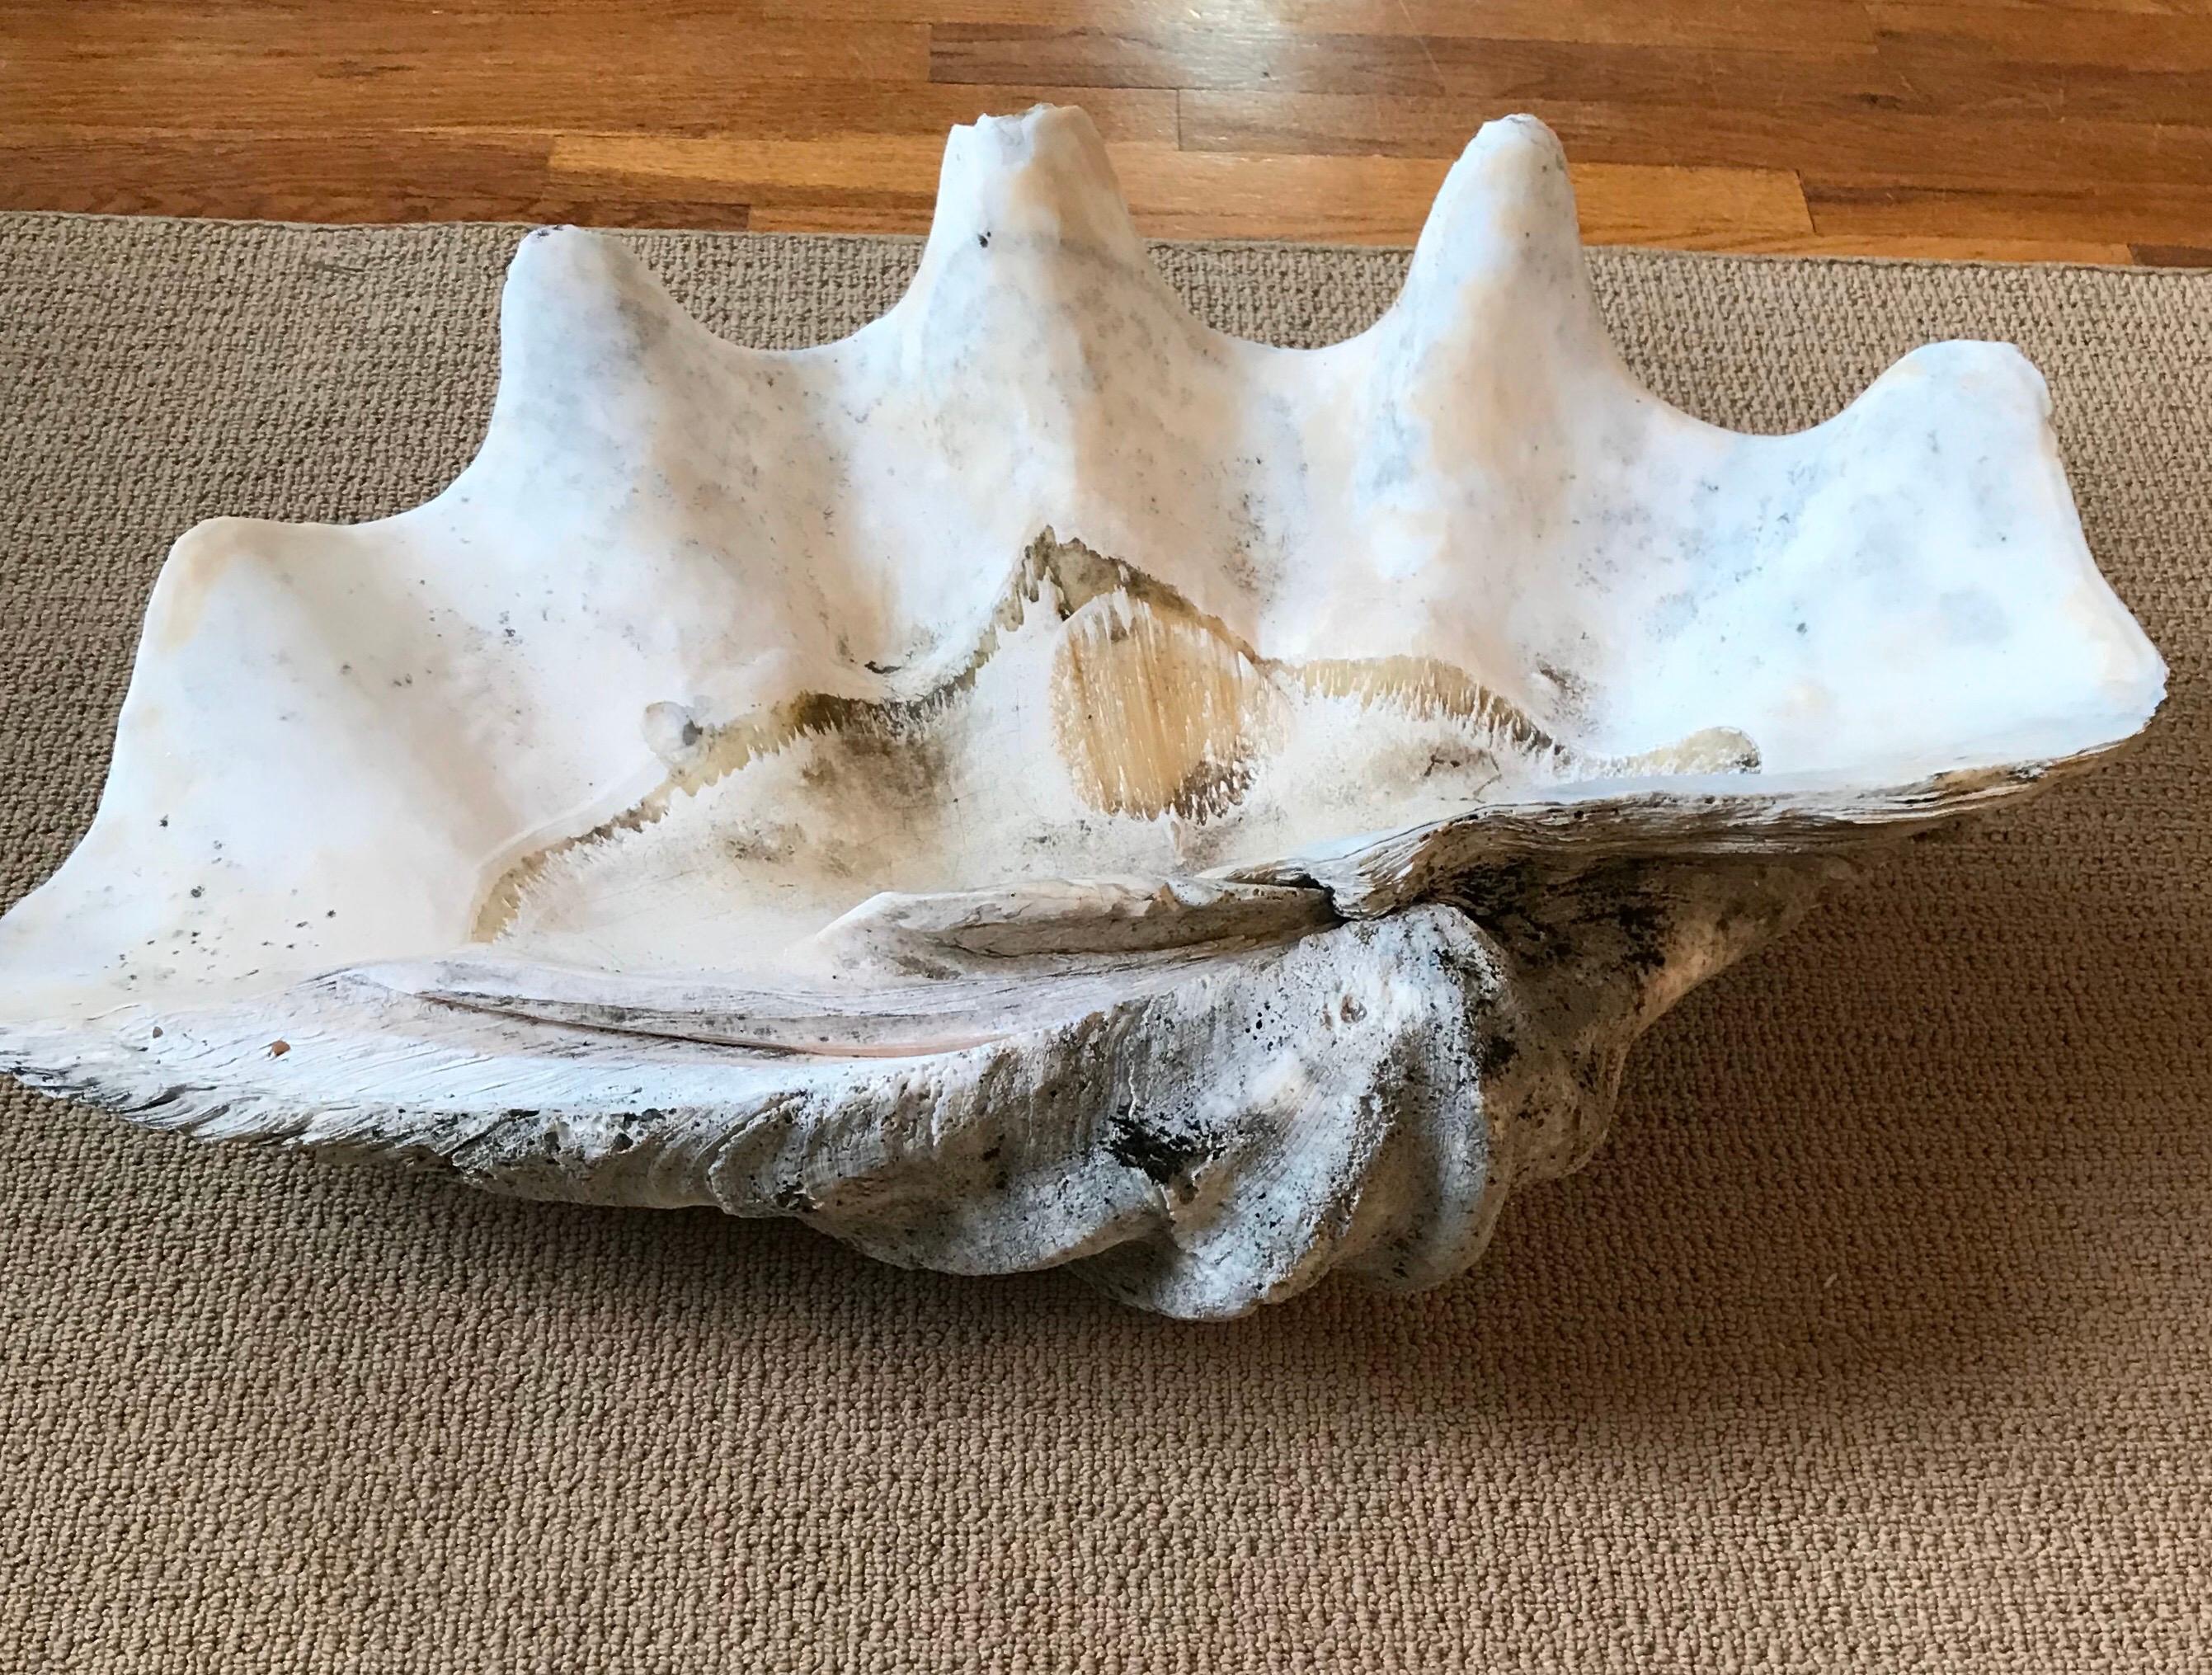 Asian Massive 19th Century South Pacific Clam Shell, Tridacna Gigas